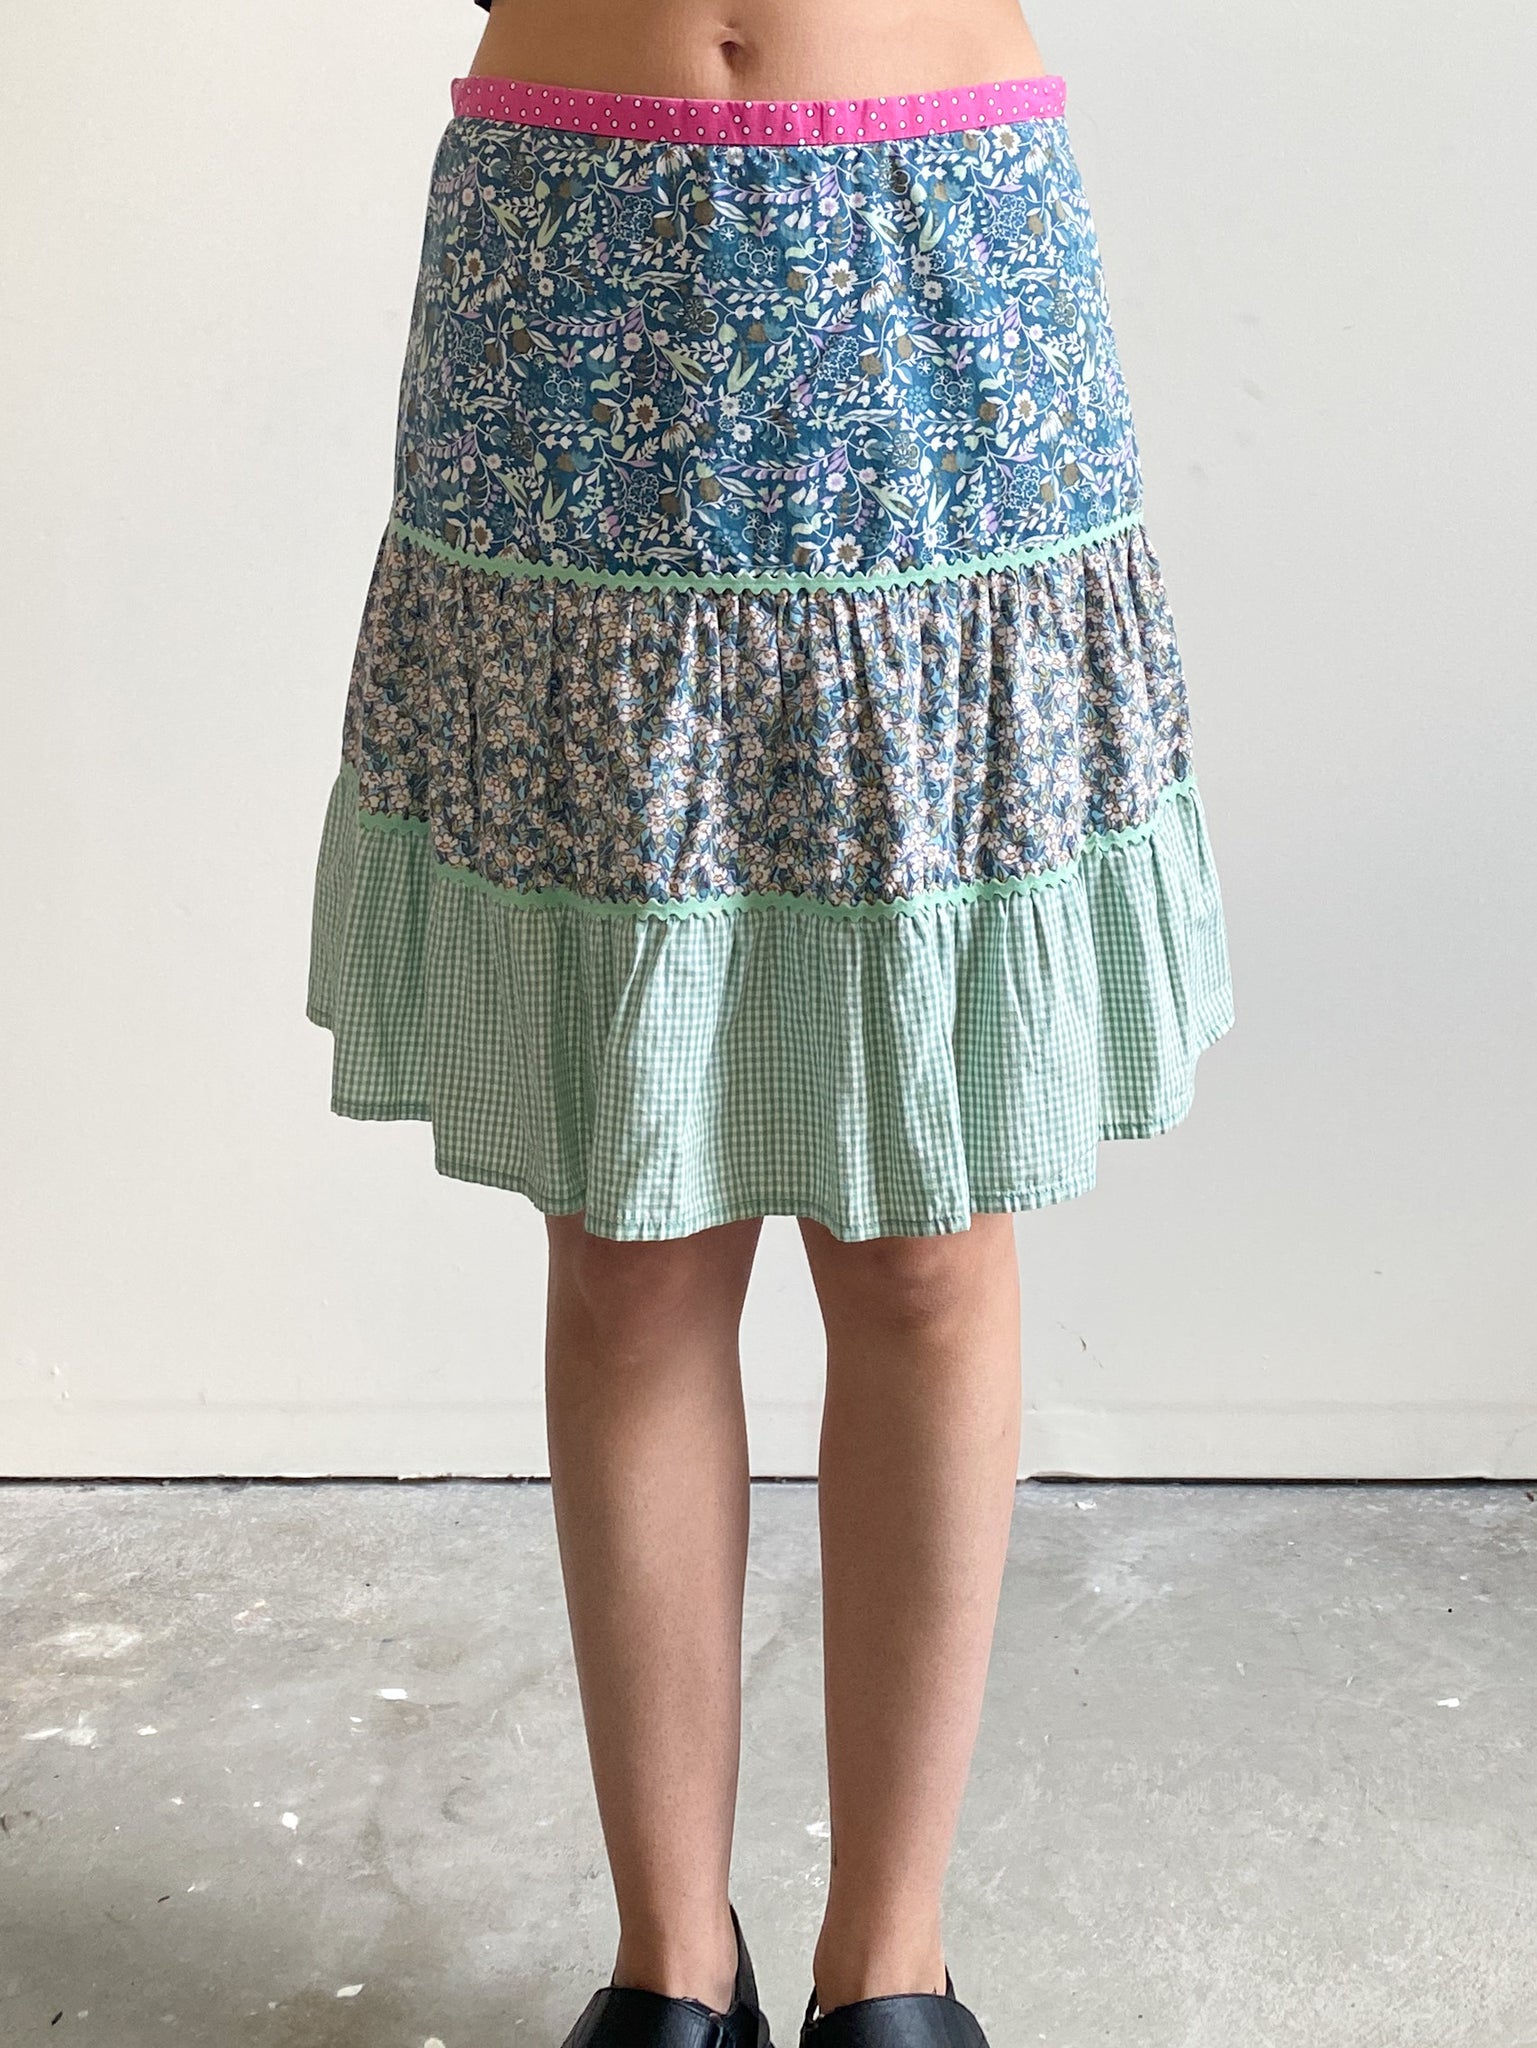 American Eagle Mixed Print Tiered Skirt (XS)